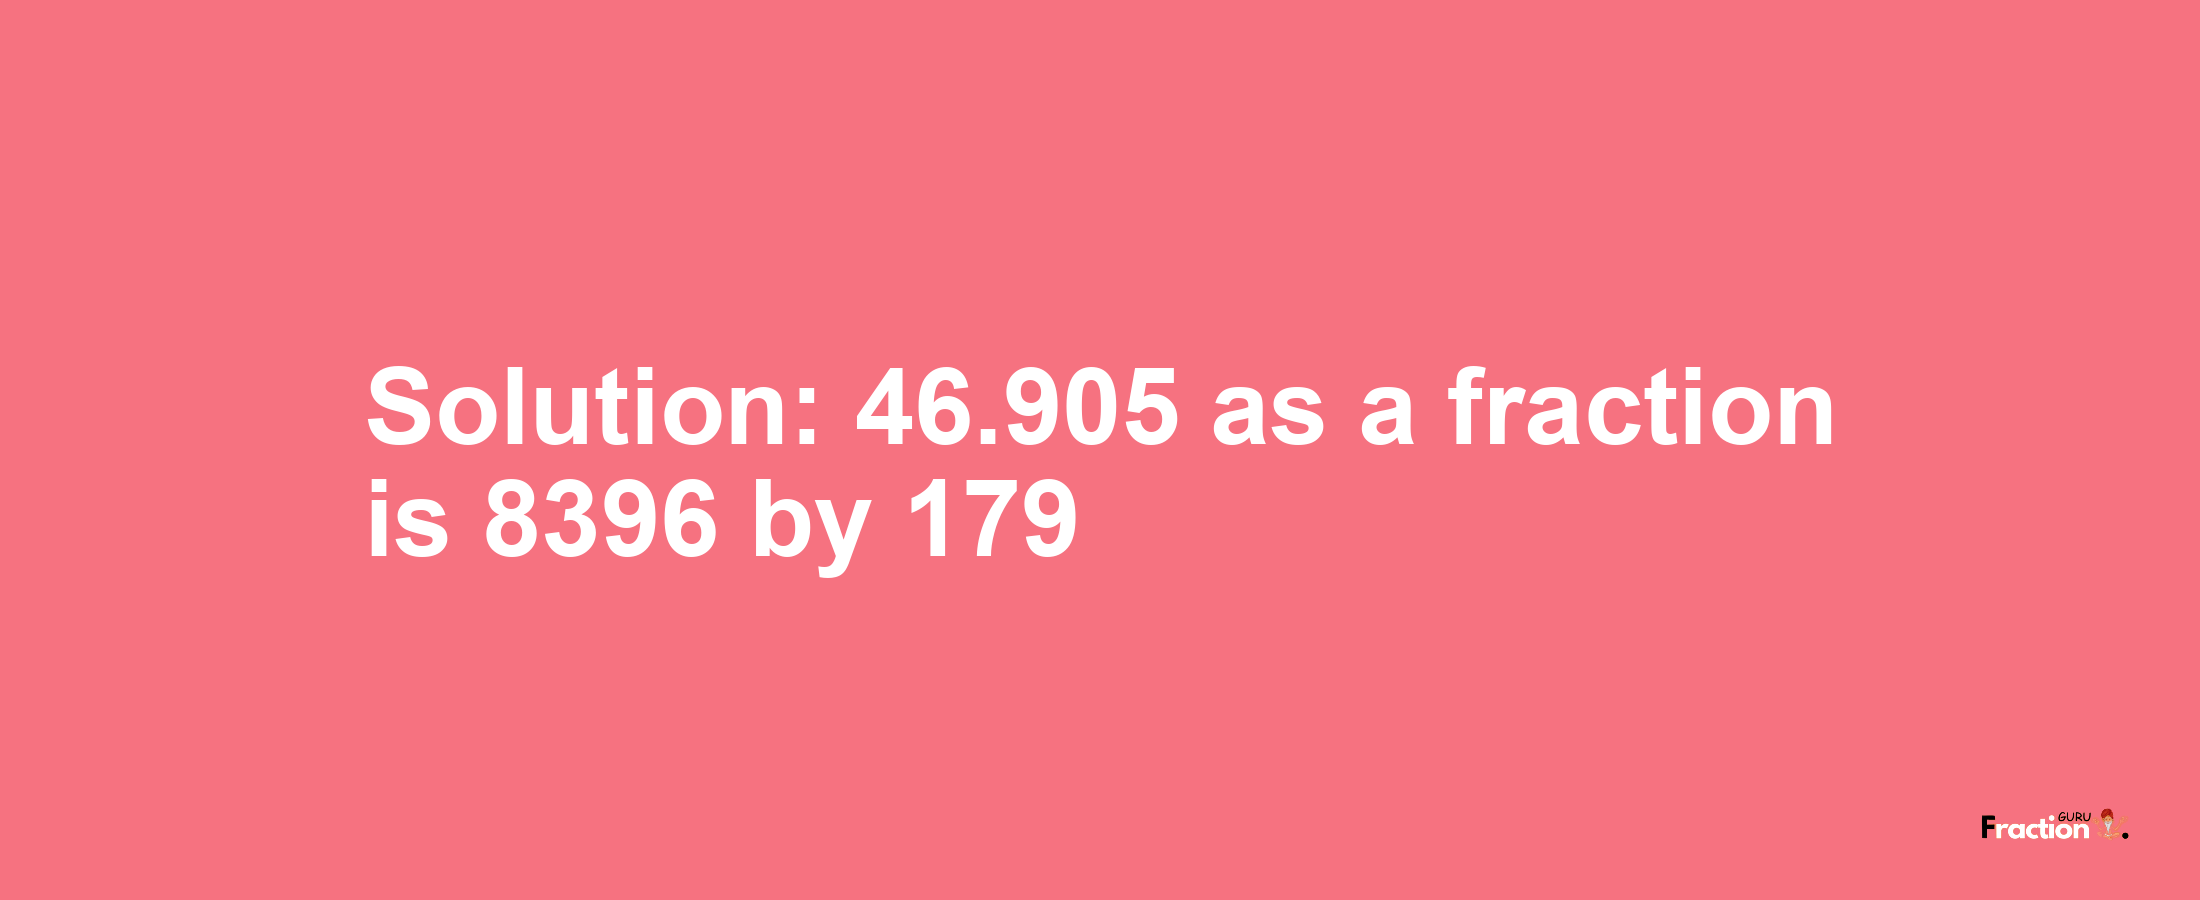 Solution:46.905 as a fraction is 8396/179